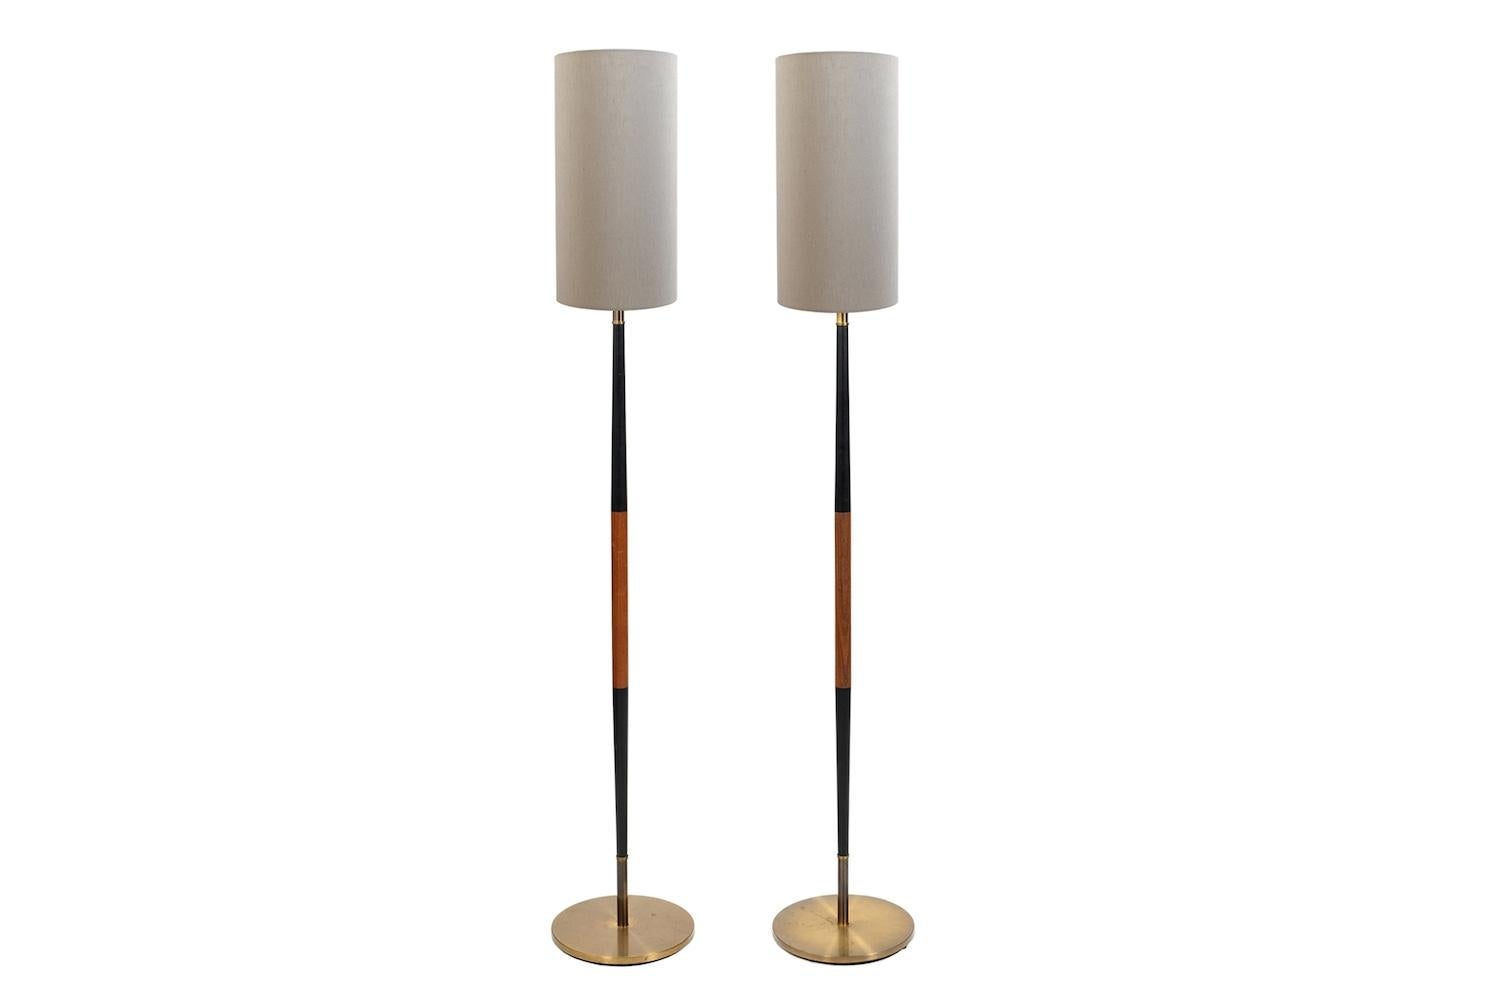 Pair of 1960s LYFA floorlamps. made in teak, brass and black parts. New grey lampshades. Original cable.